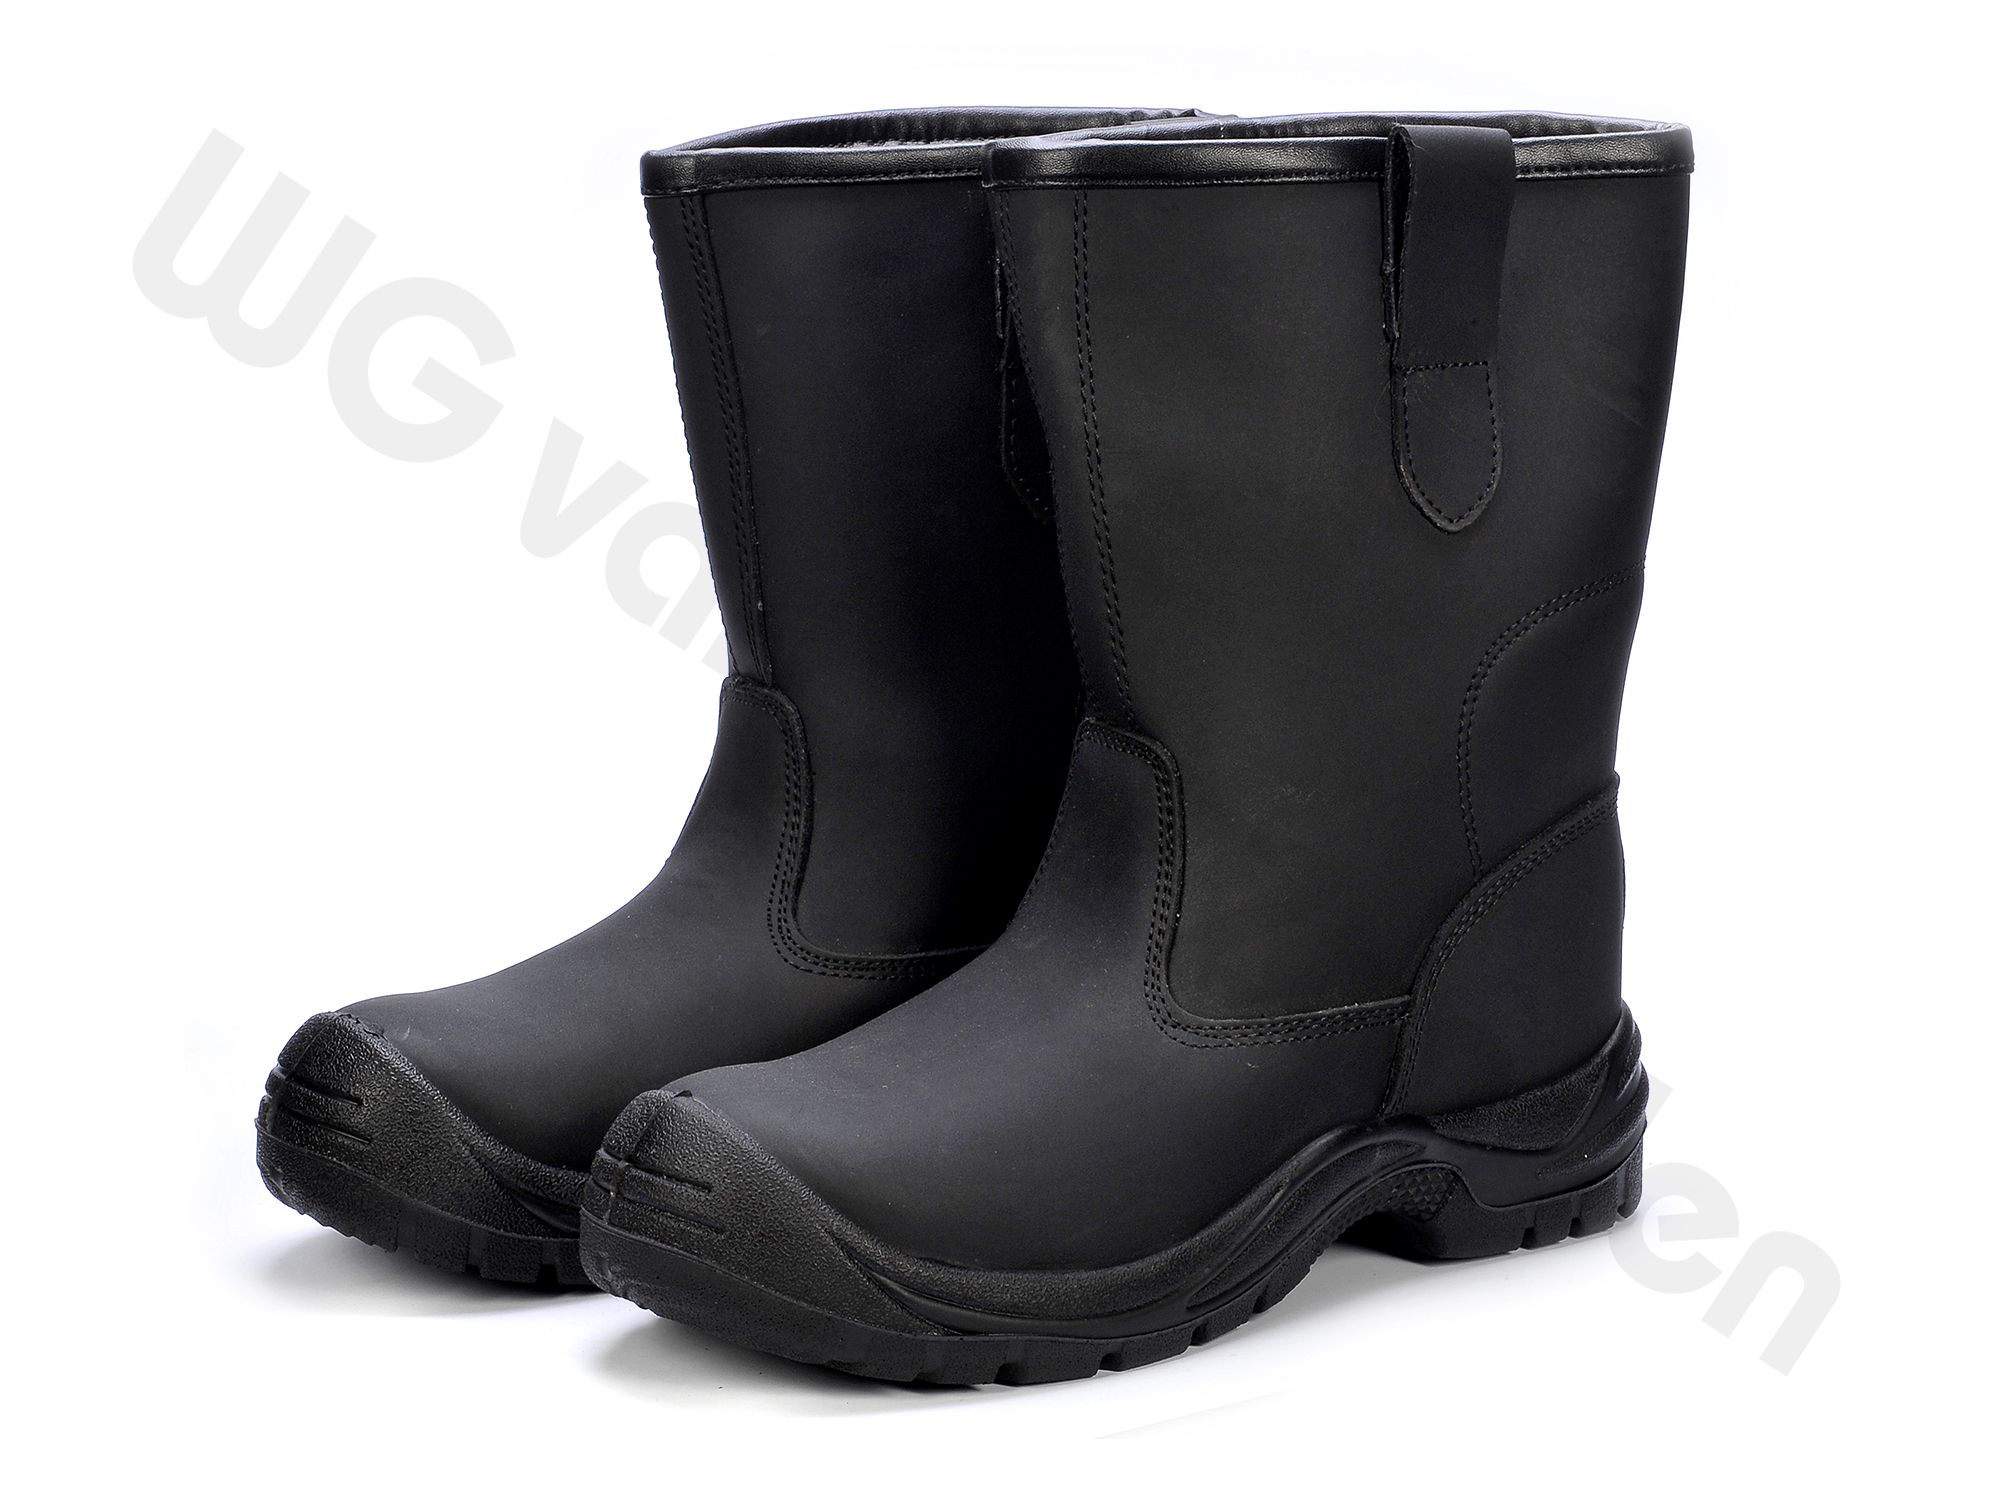 880357 BOOTS SAFETY S3 LEATHER W/STEEL TOE AND LINING 46/29CM